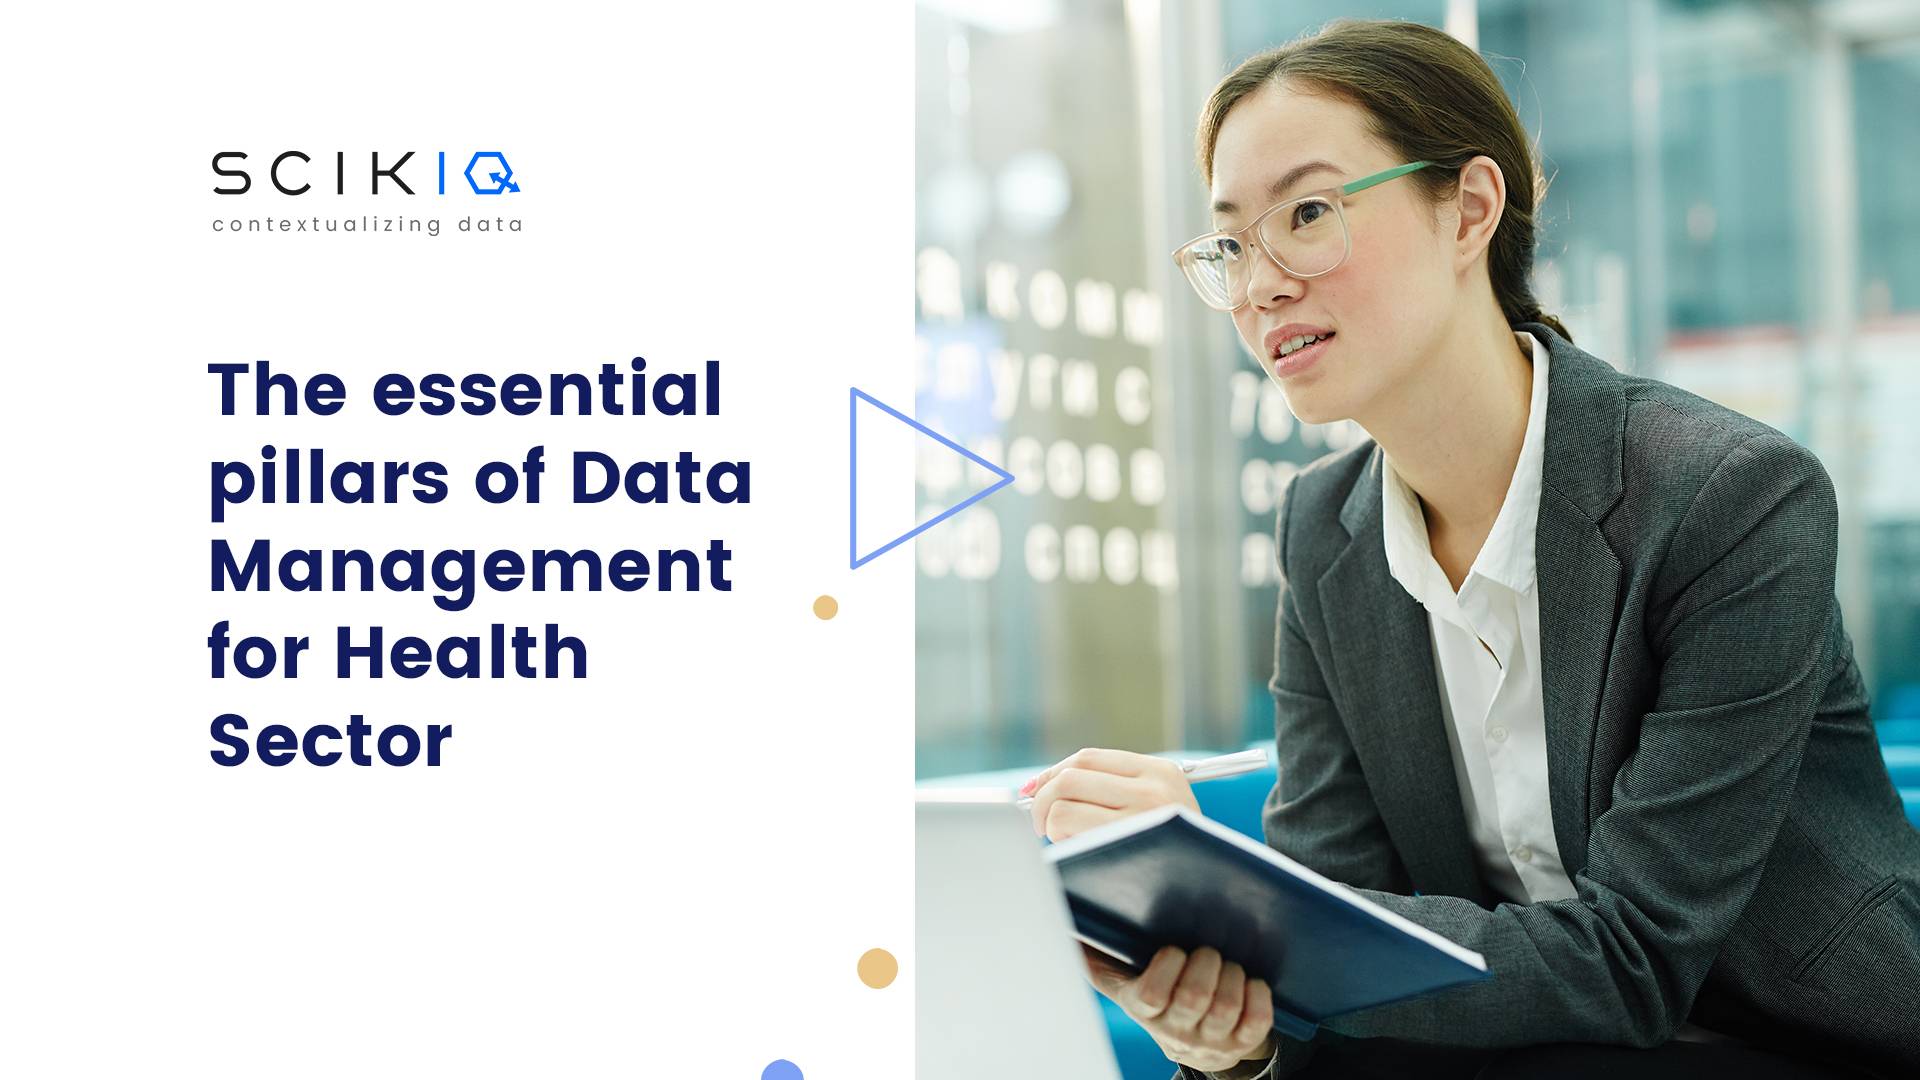 The essential pillars of Data Management for the Health Sector